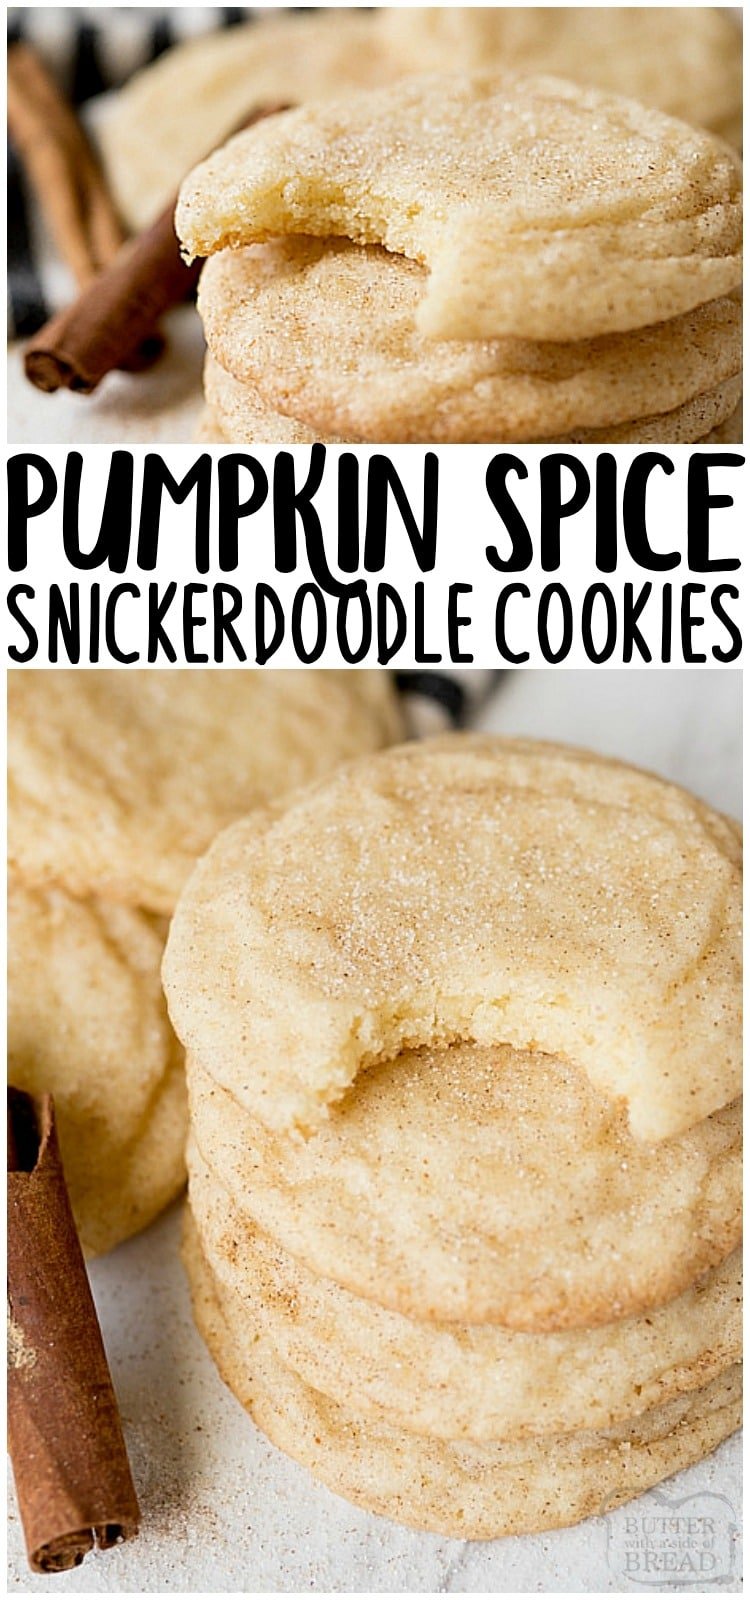 Pumpkin Spice Snickerdoodles are a soft, pillowy vanilla cookie rolled in pumpkin pie spice & sugar before baking! Fun Fall twist to classic snickerdoodle cookie recipe!